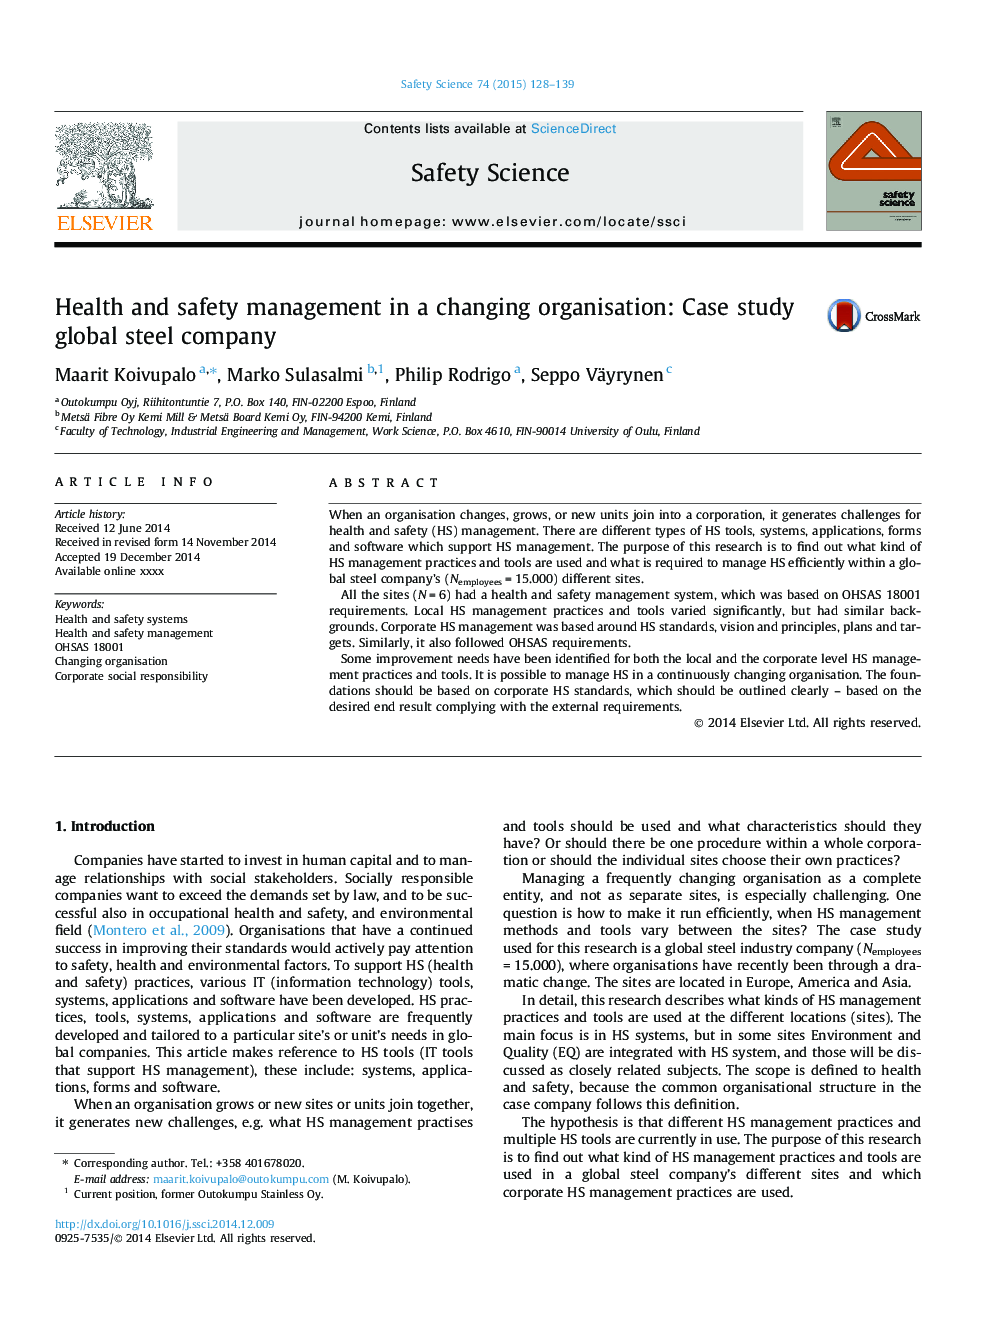 Health and safety management in a changing organisation: Case study global steel company